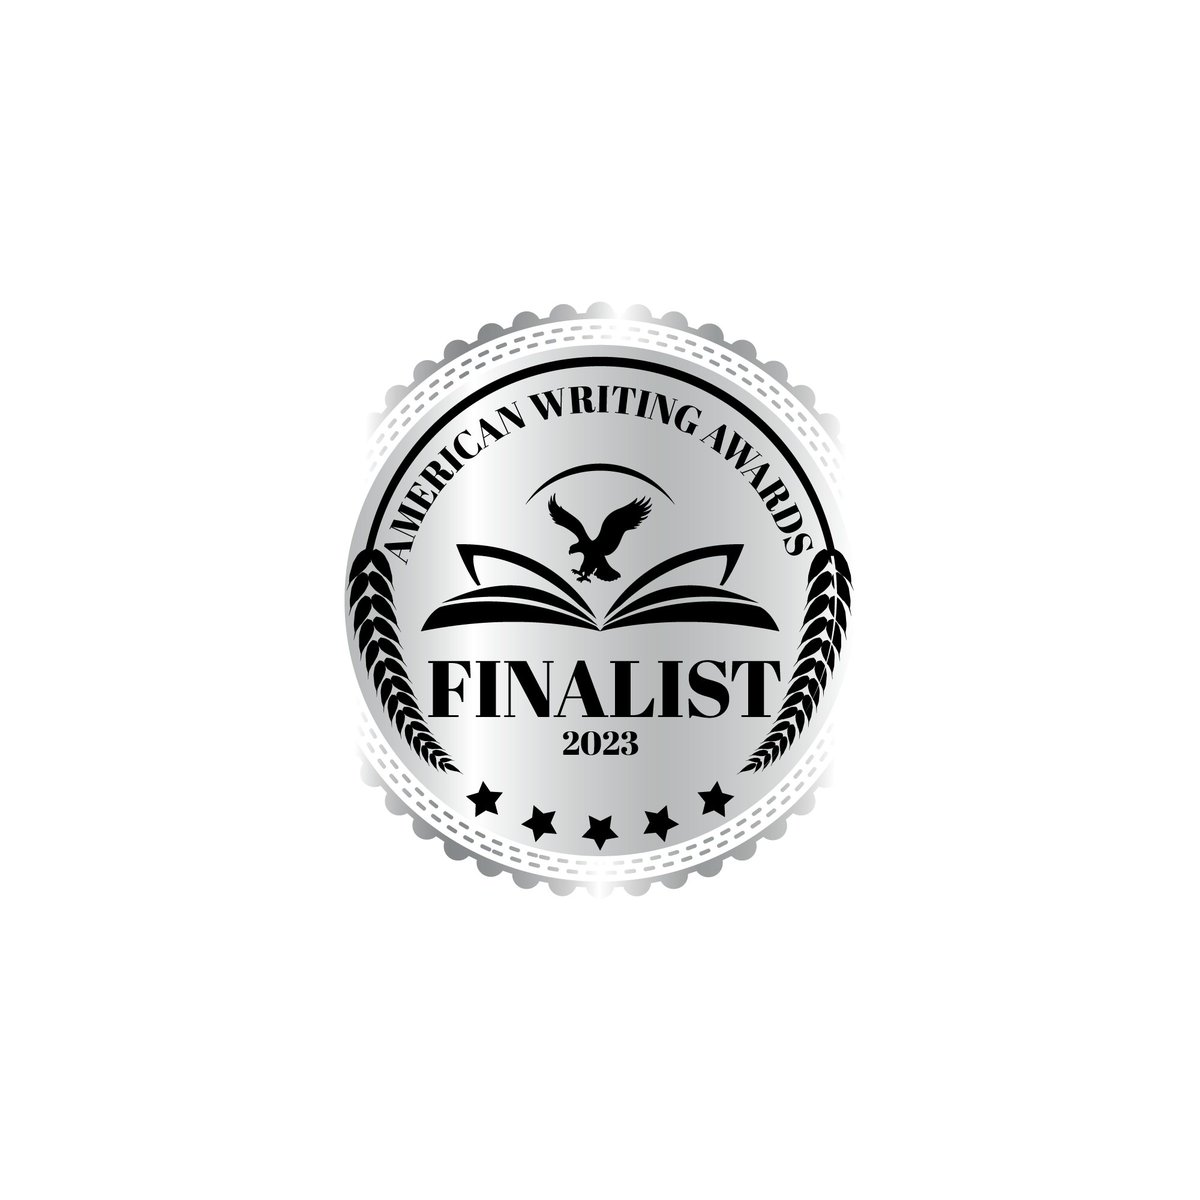 An incredibly special Thank You to the American Writing Awards americanwritingawards.com for naming my book entitled 'You Are Still Alive, Now Act Like It' a finalist (Spiritual 2023) #Honored #Grateful #BookAward